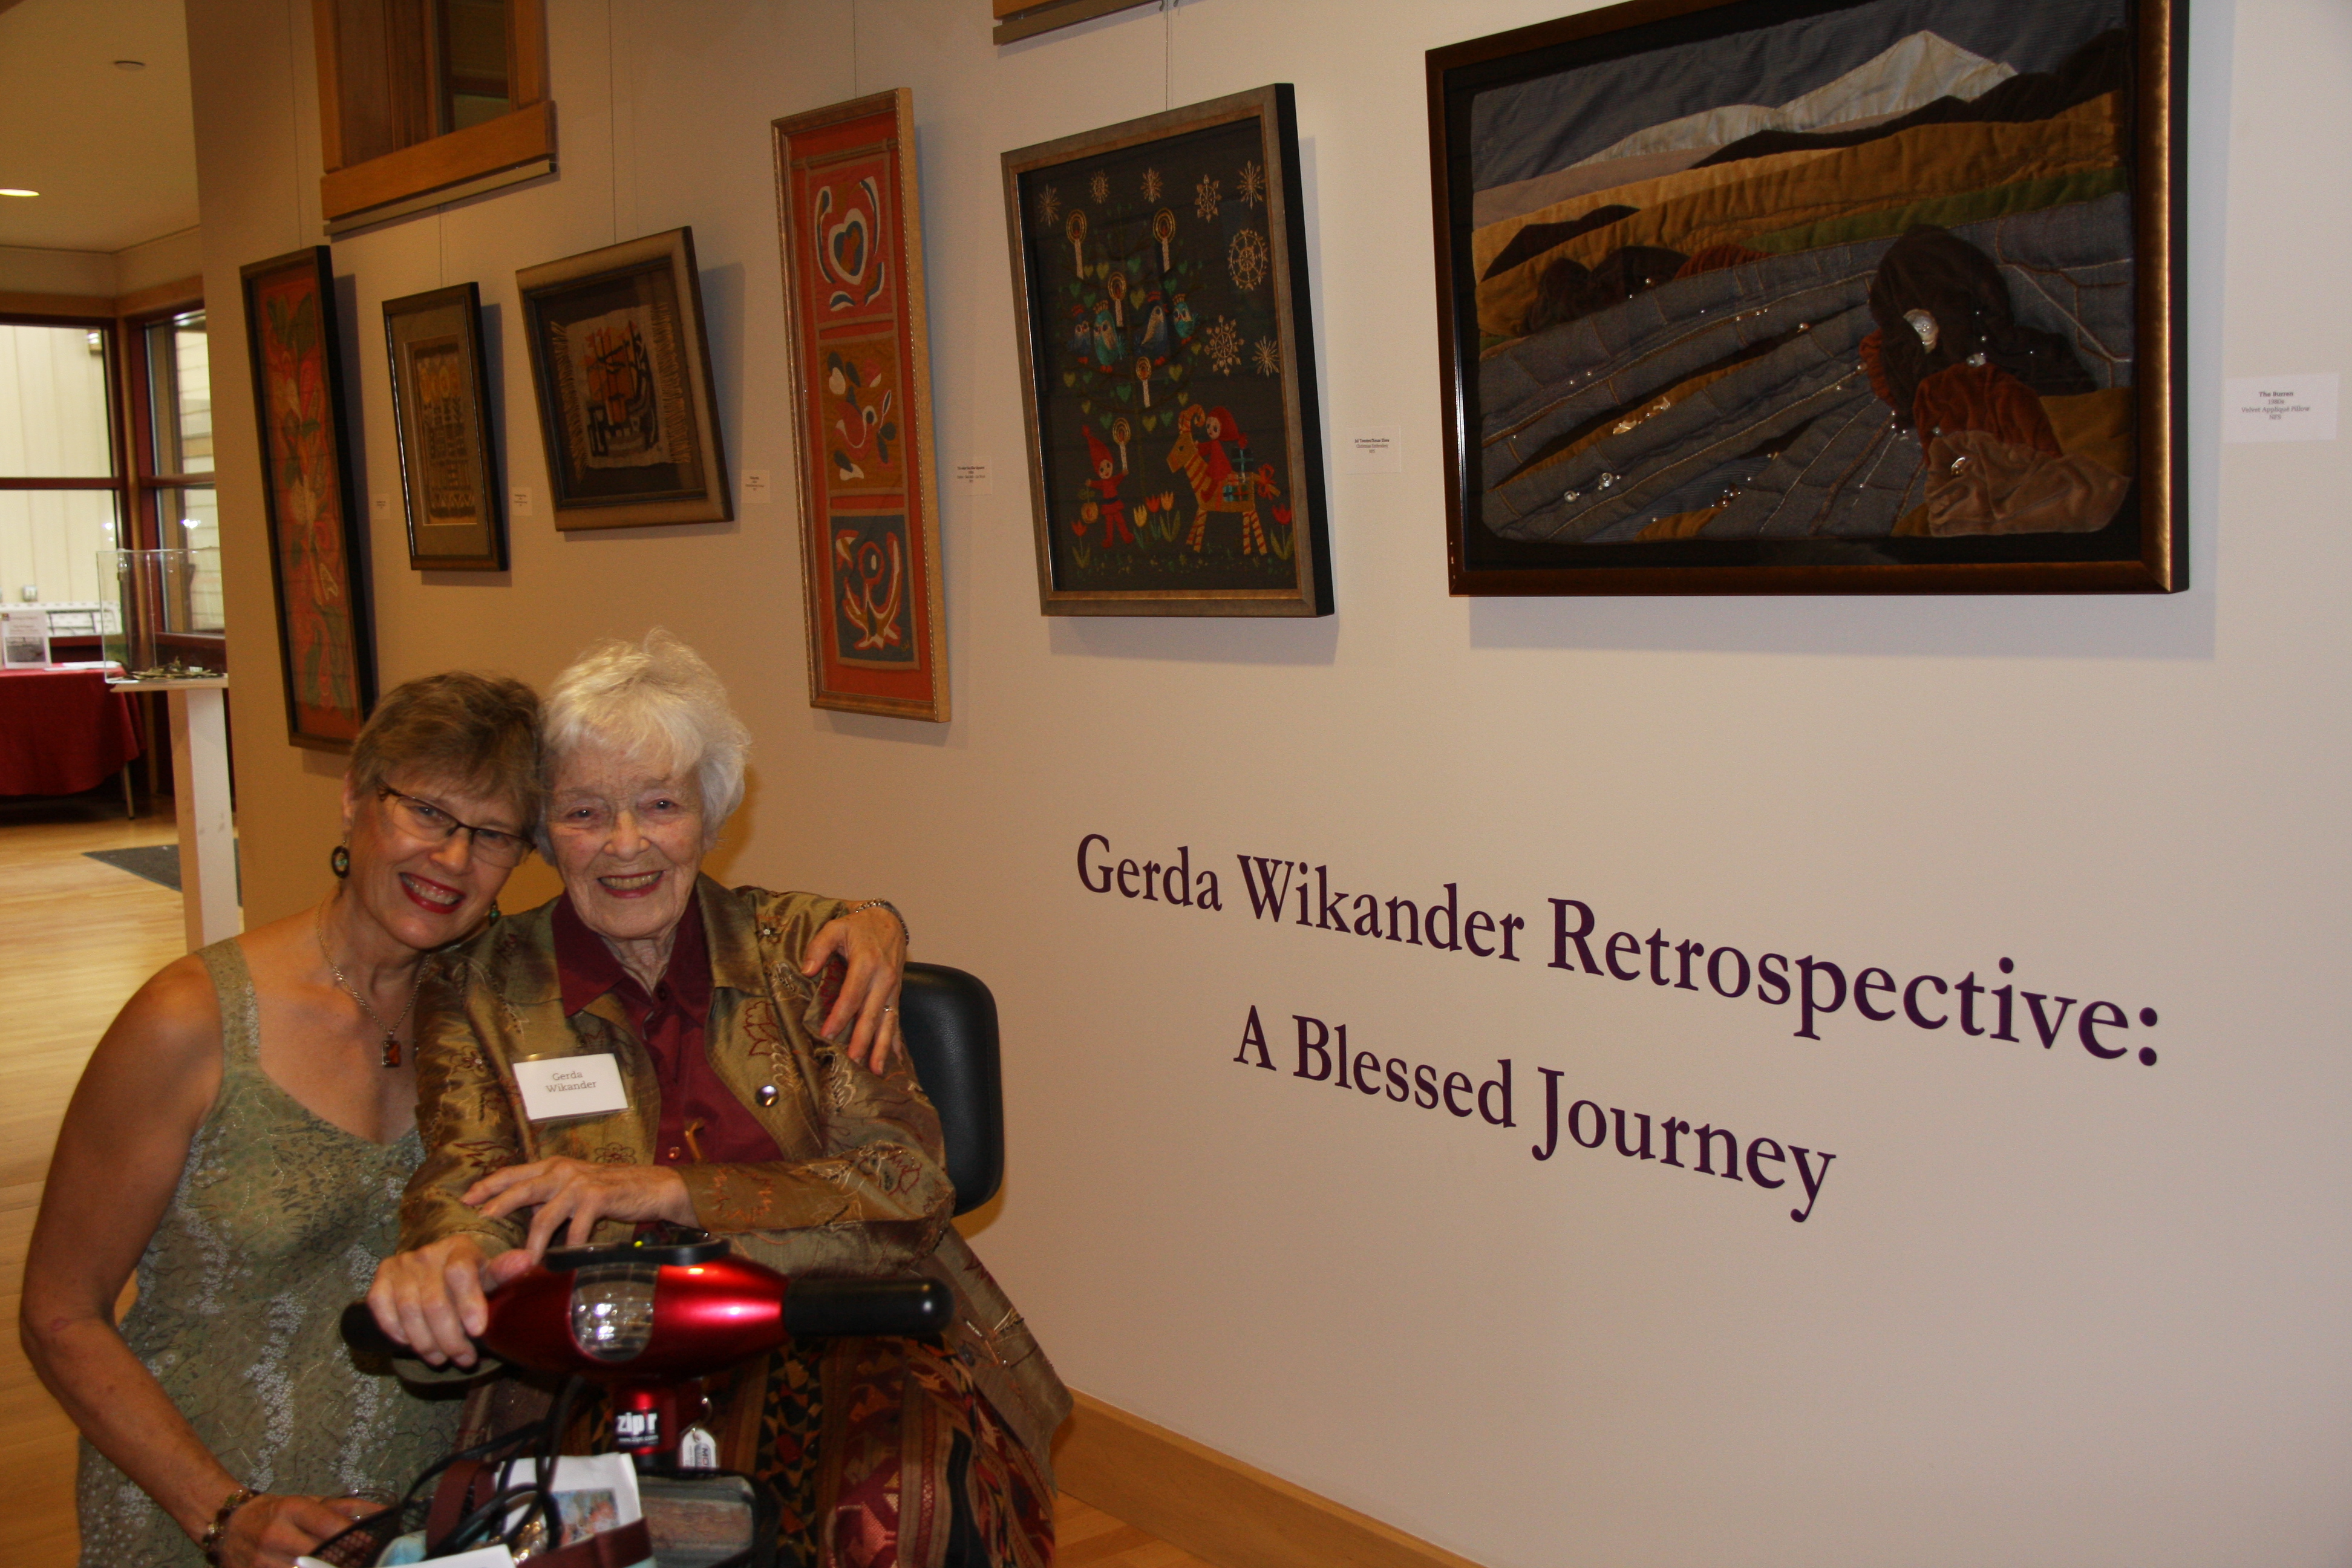 Artist Greda Wikander (right), 99 years old, has been represented in the Central Adirondack Art Show for 62 years. The show is hostd locally by View. A retrospective of her work is being featured to coincide with this year's exhibit. Pictured with Gerda is her daughter Kristine.